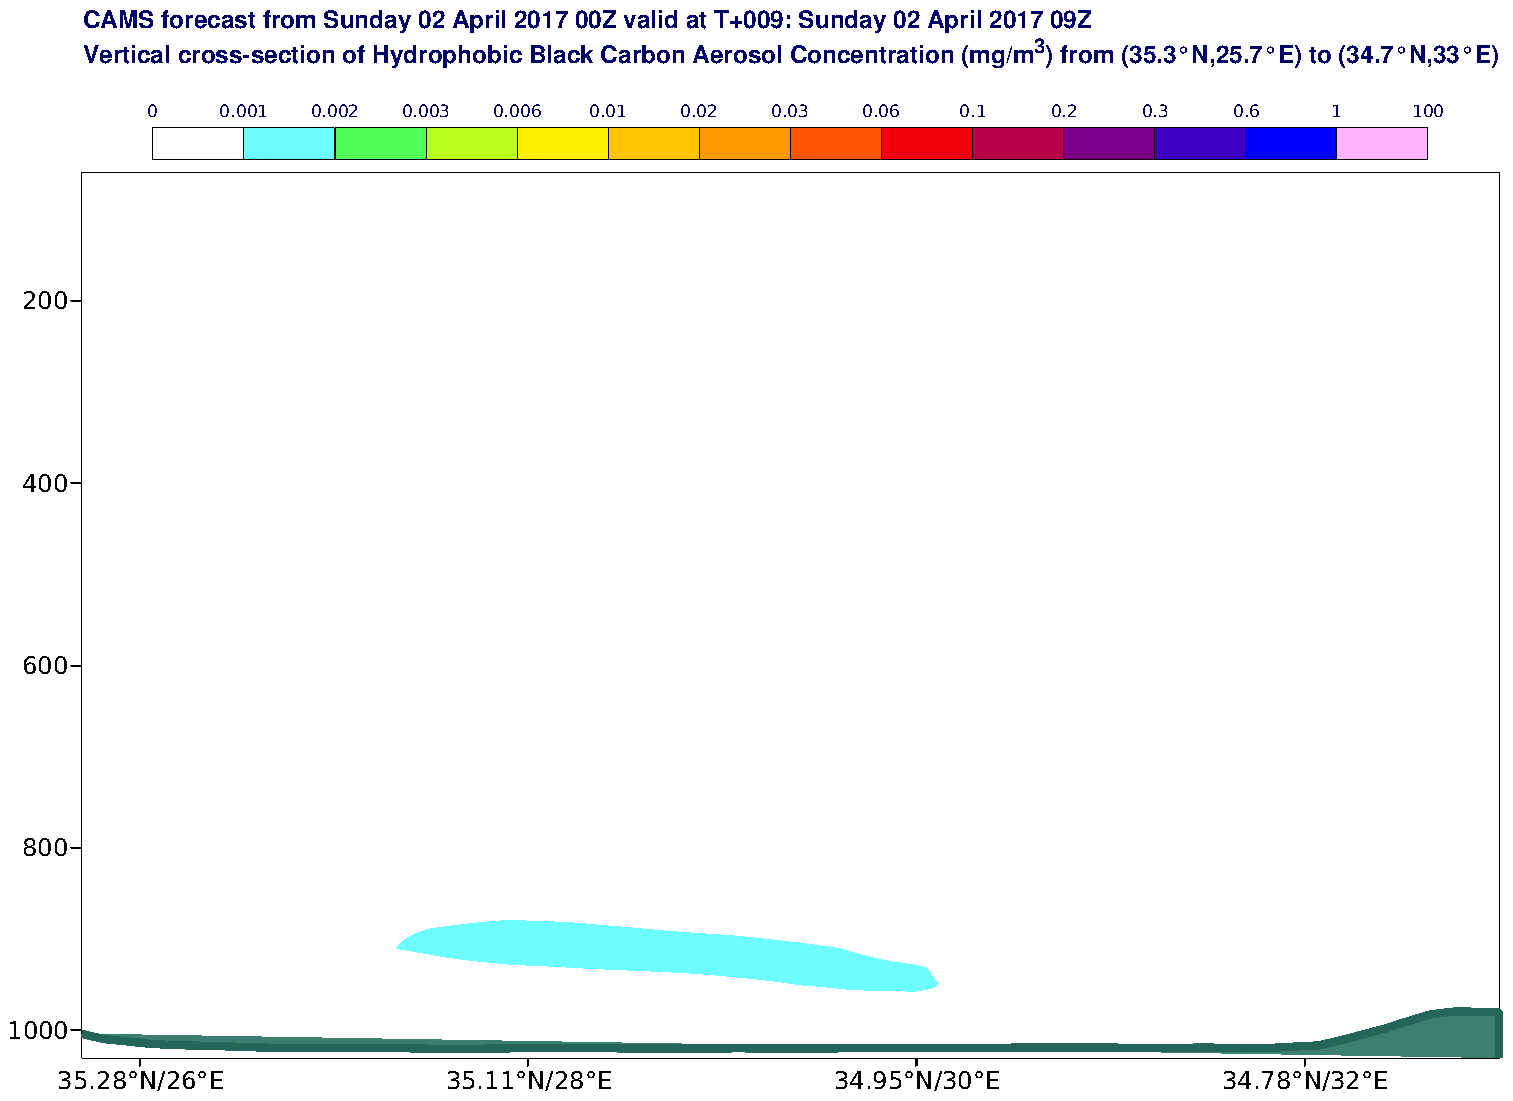 Vertical cross-section of Hydrophobic Black Carbon Aerosol Concentration (mg/m3) valid at T9 - 2017-04-02 09:00